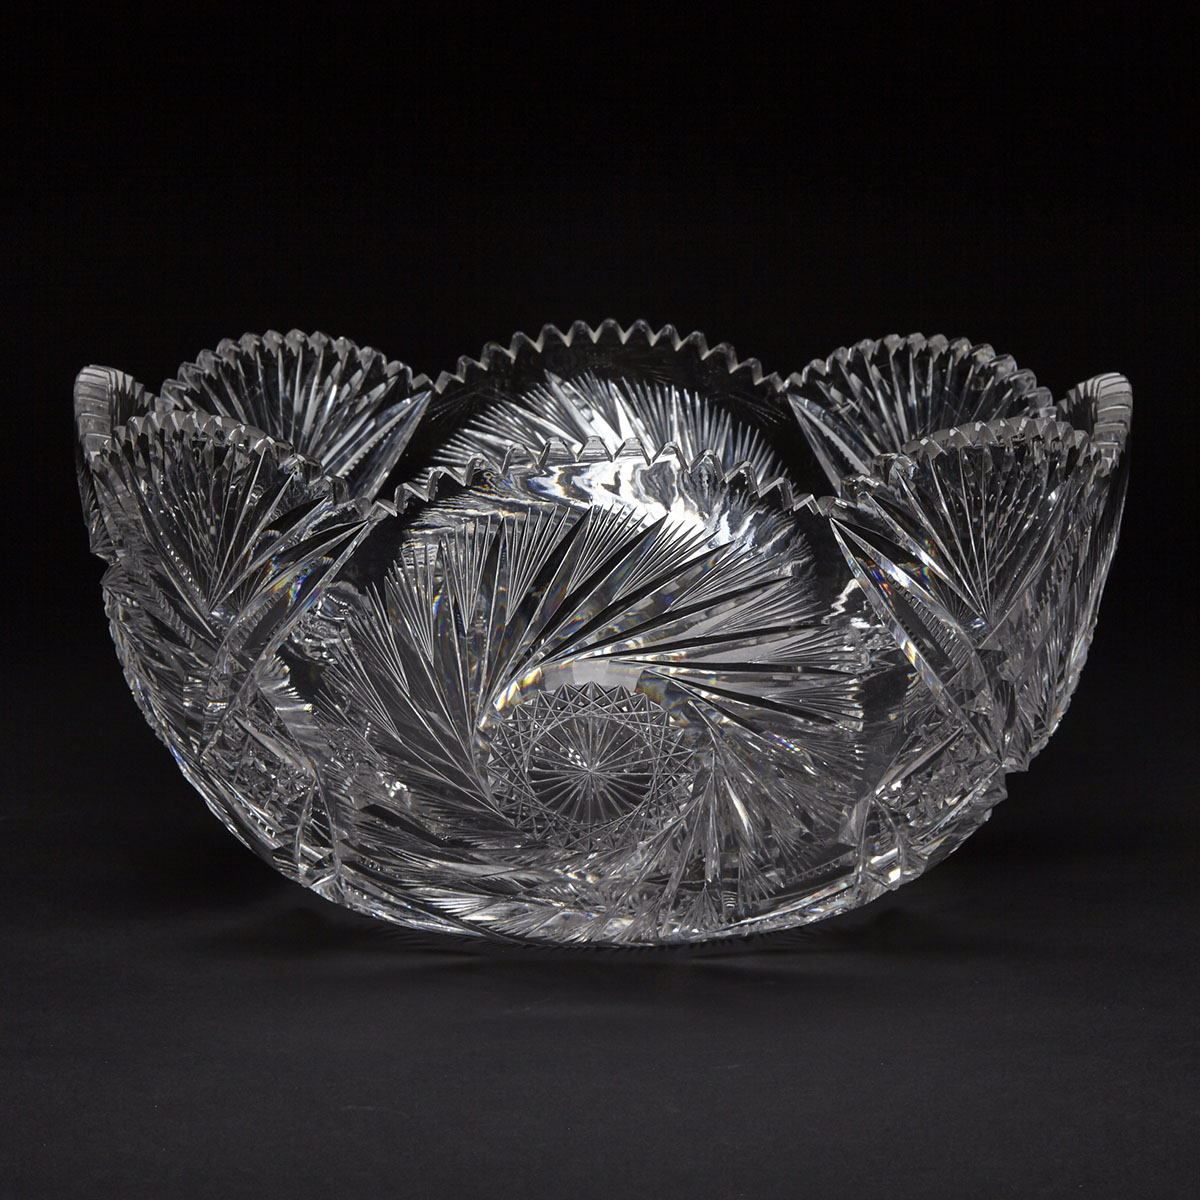 Large Cut Glass Punch Bowl, early 20th century